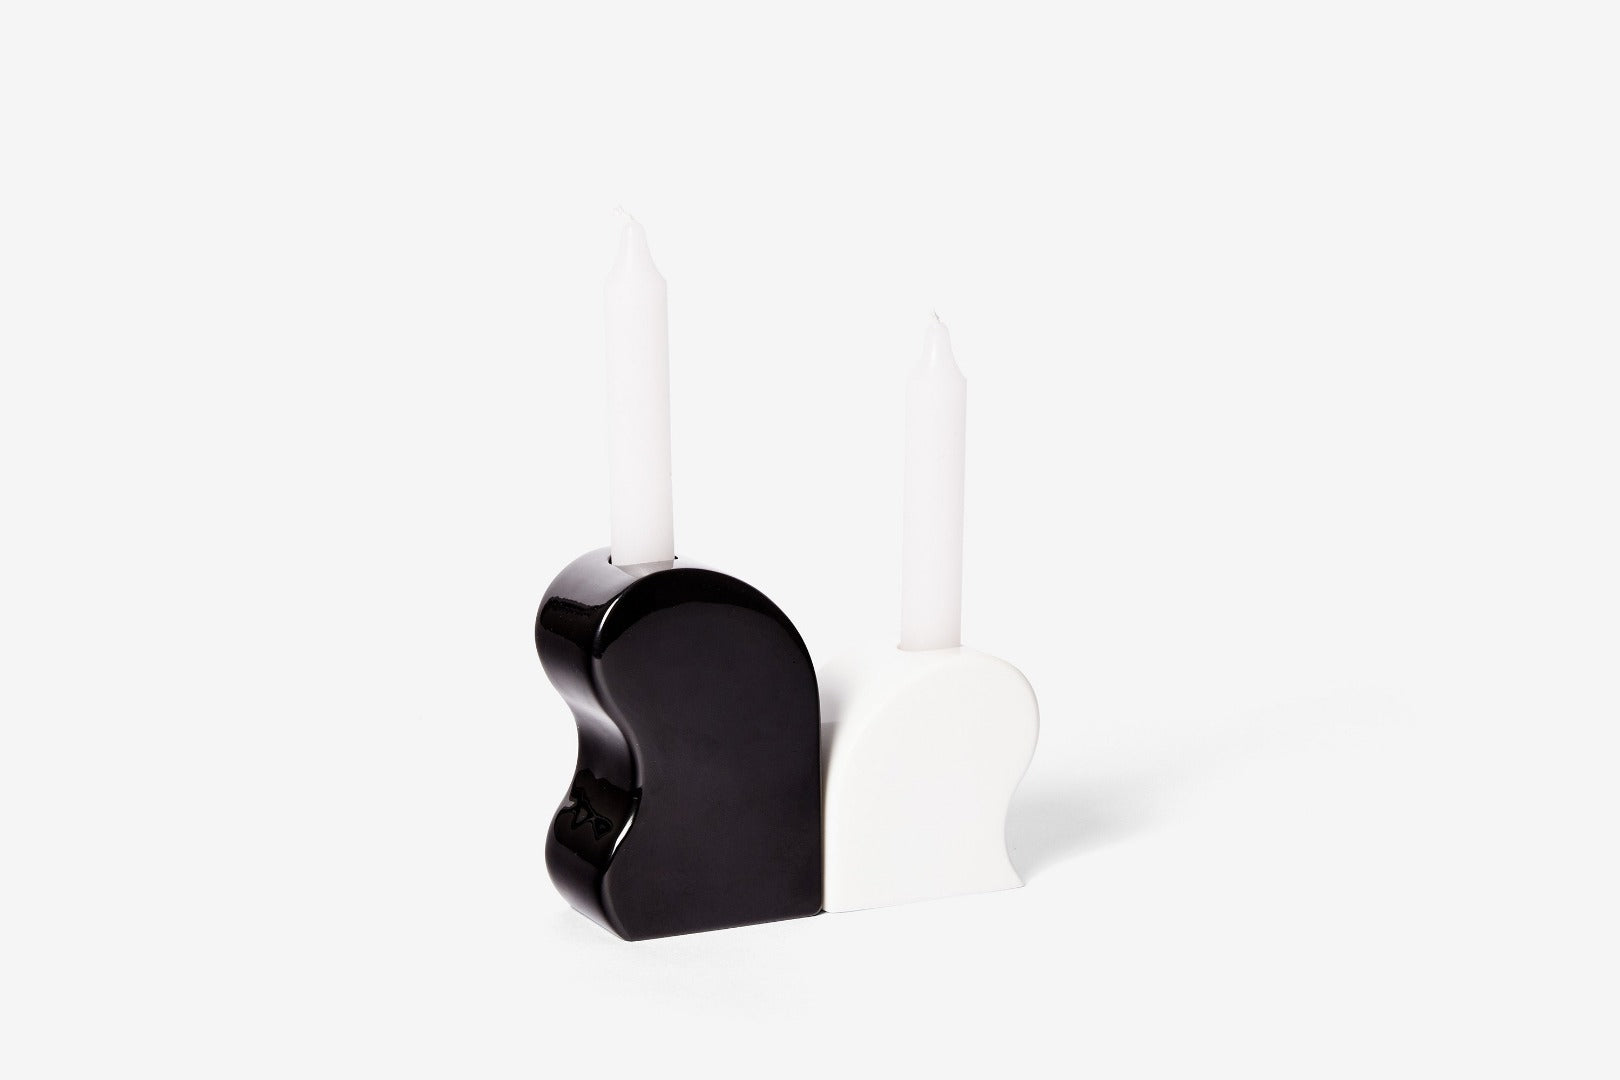 curved black and white candle holders facing away from each other - two unlit white candles are in them